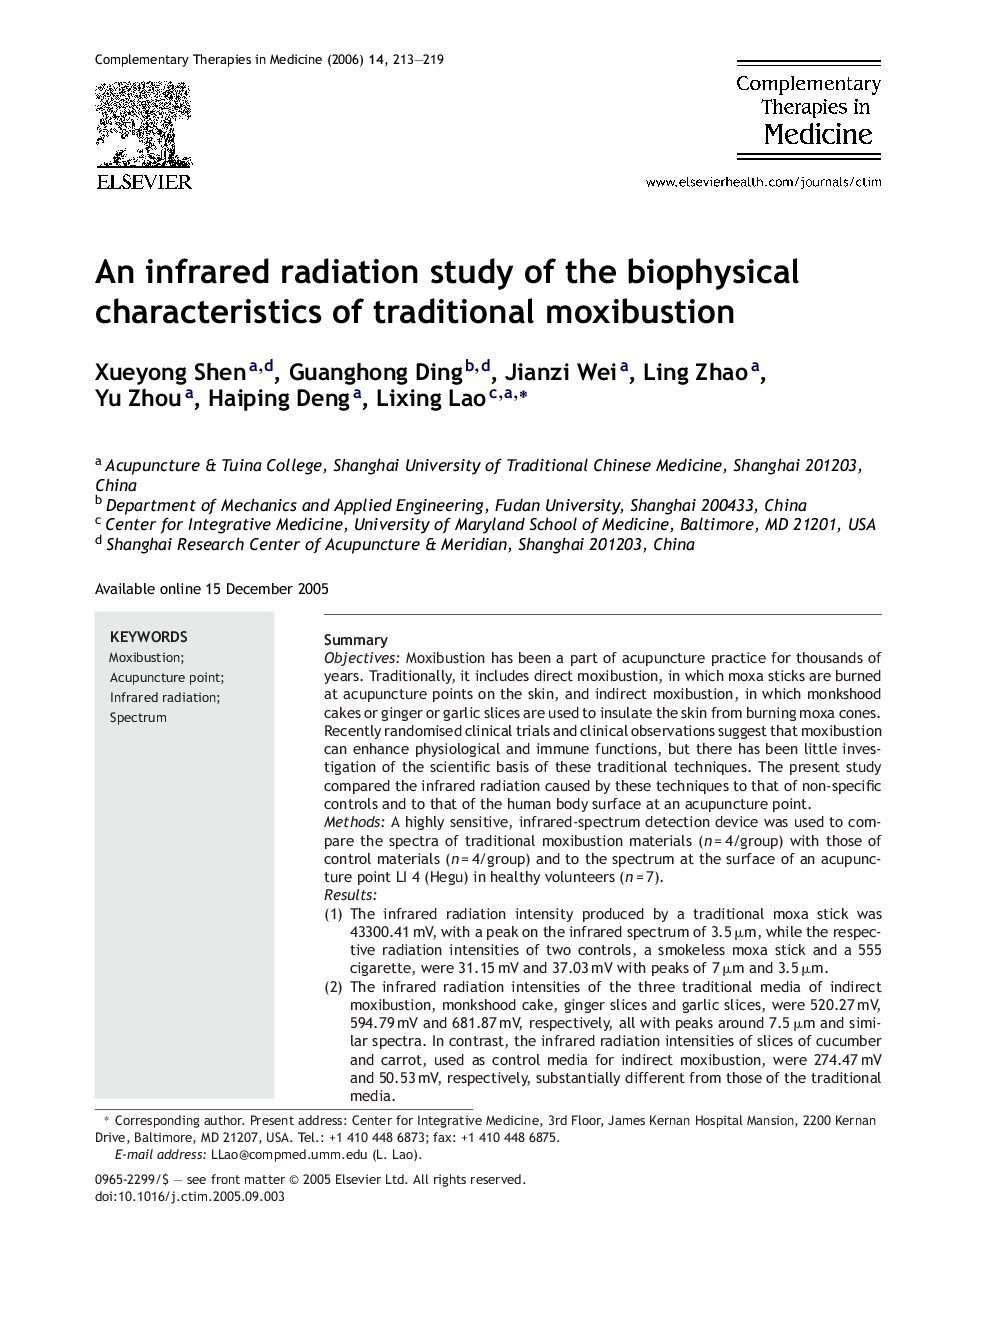 An infrared radiation study of the biophysical characteristics of traditional moxibustion